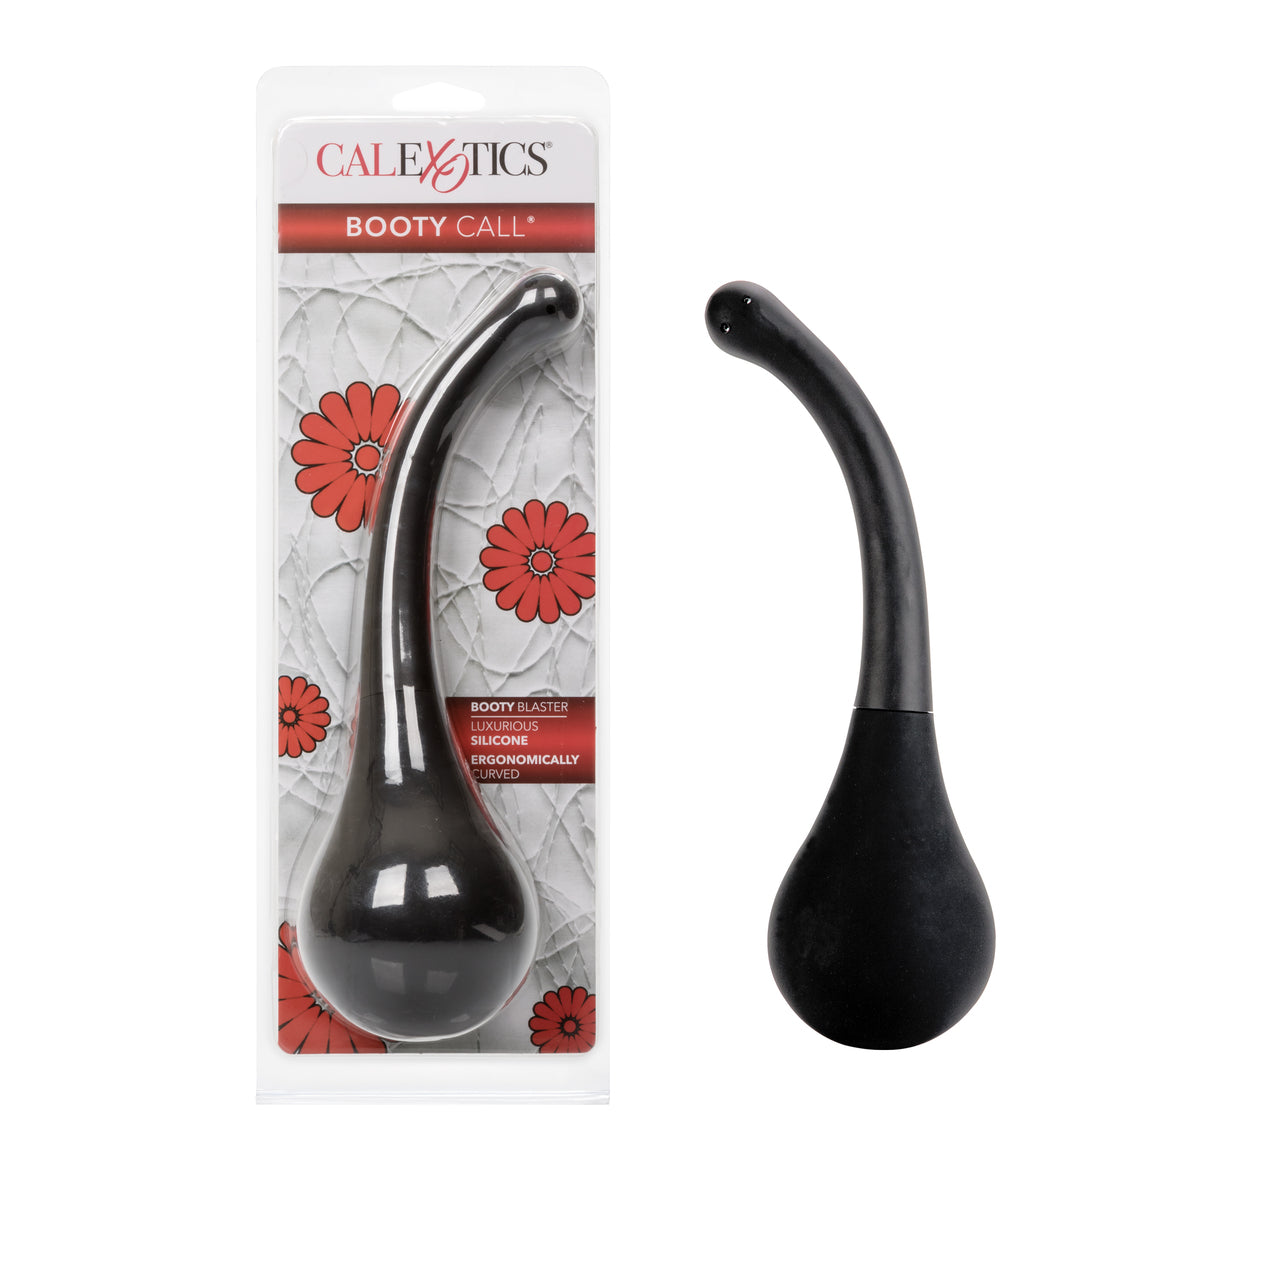 Booty Call Booty Blaster - 6.5oz/190ml - Thorn & Feather Sex Toy Canada